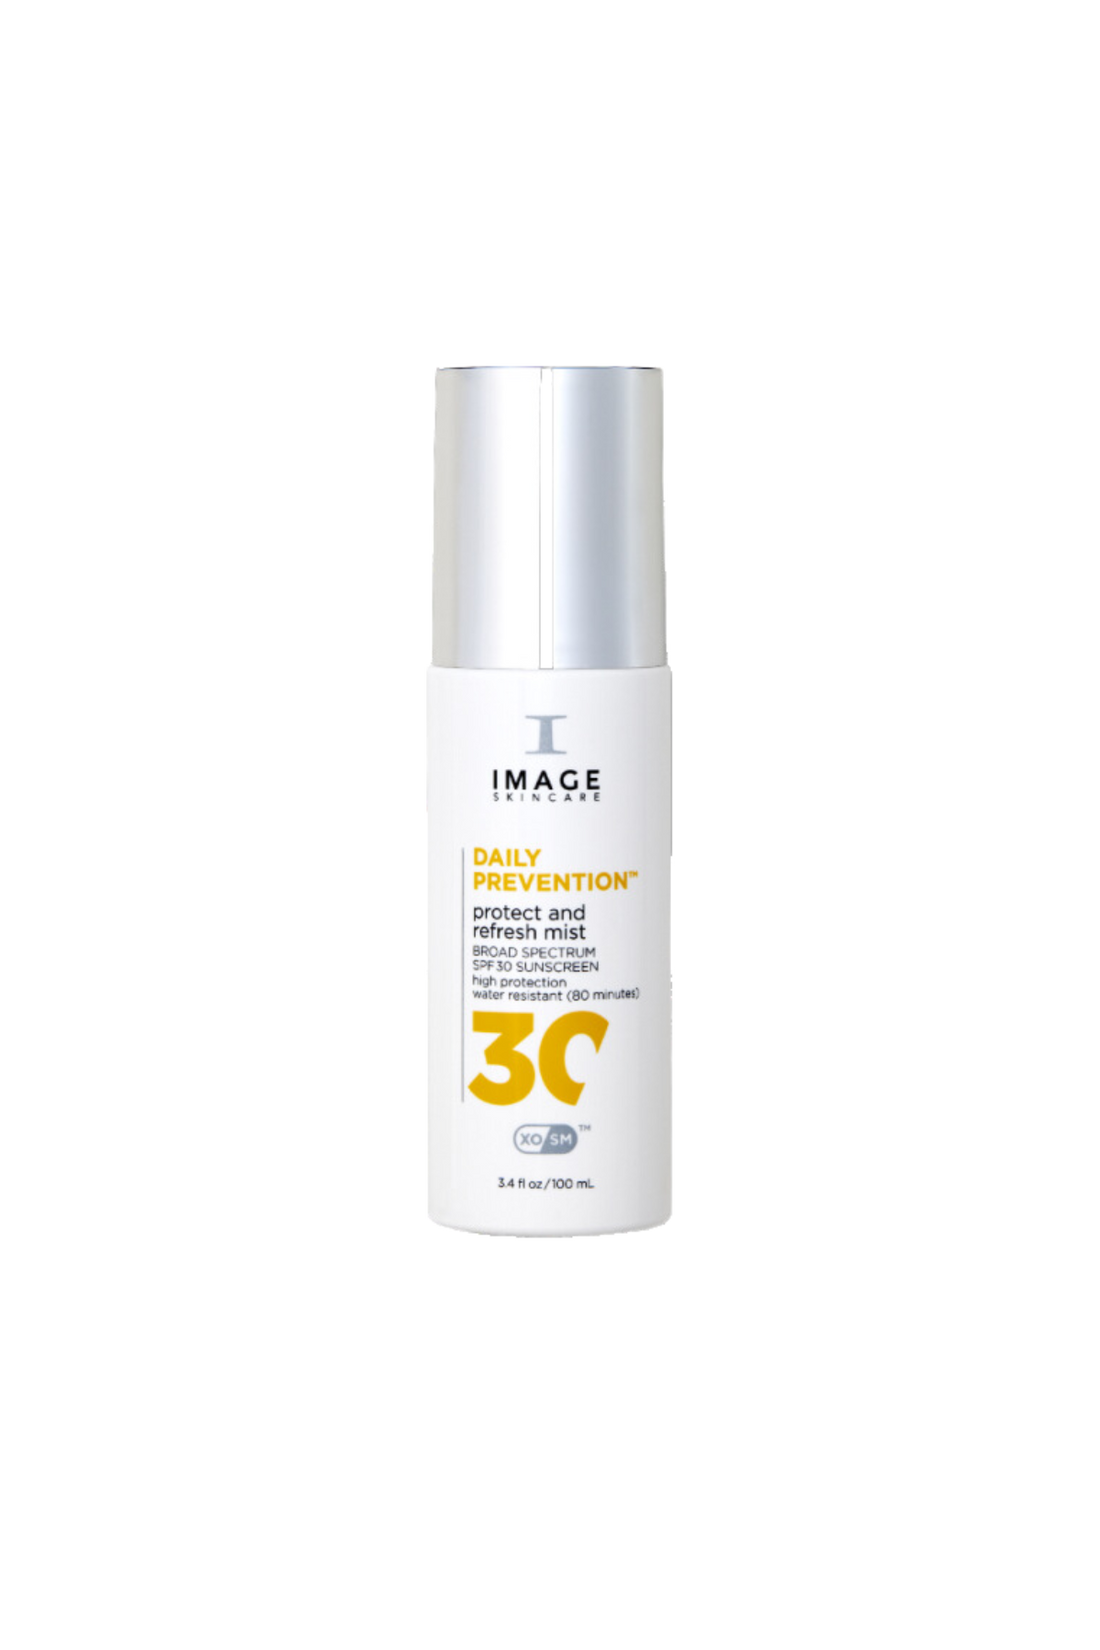 DAILY PREVENTION - Protect And Refresh Mist SPF 30